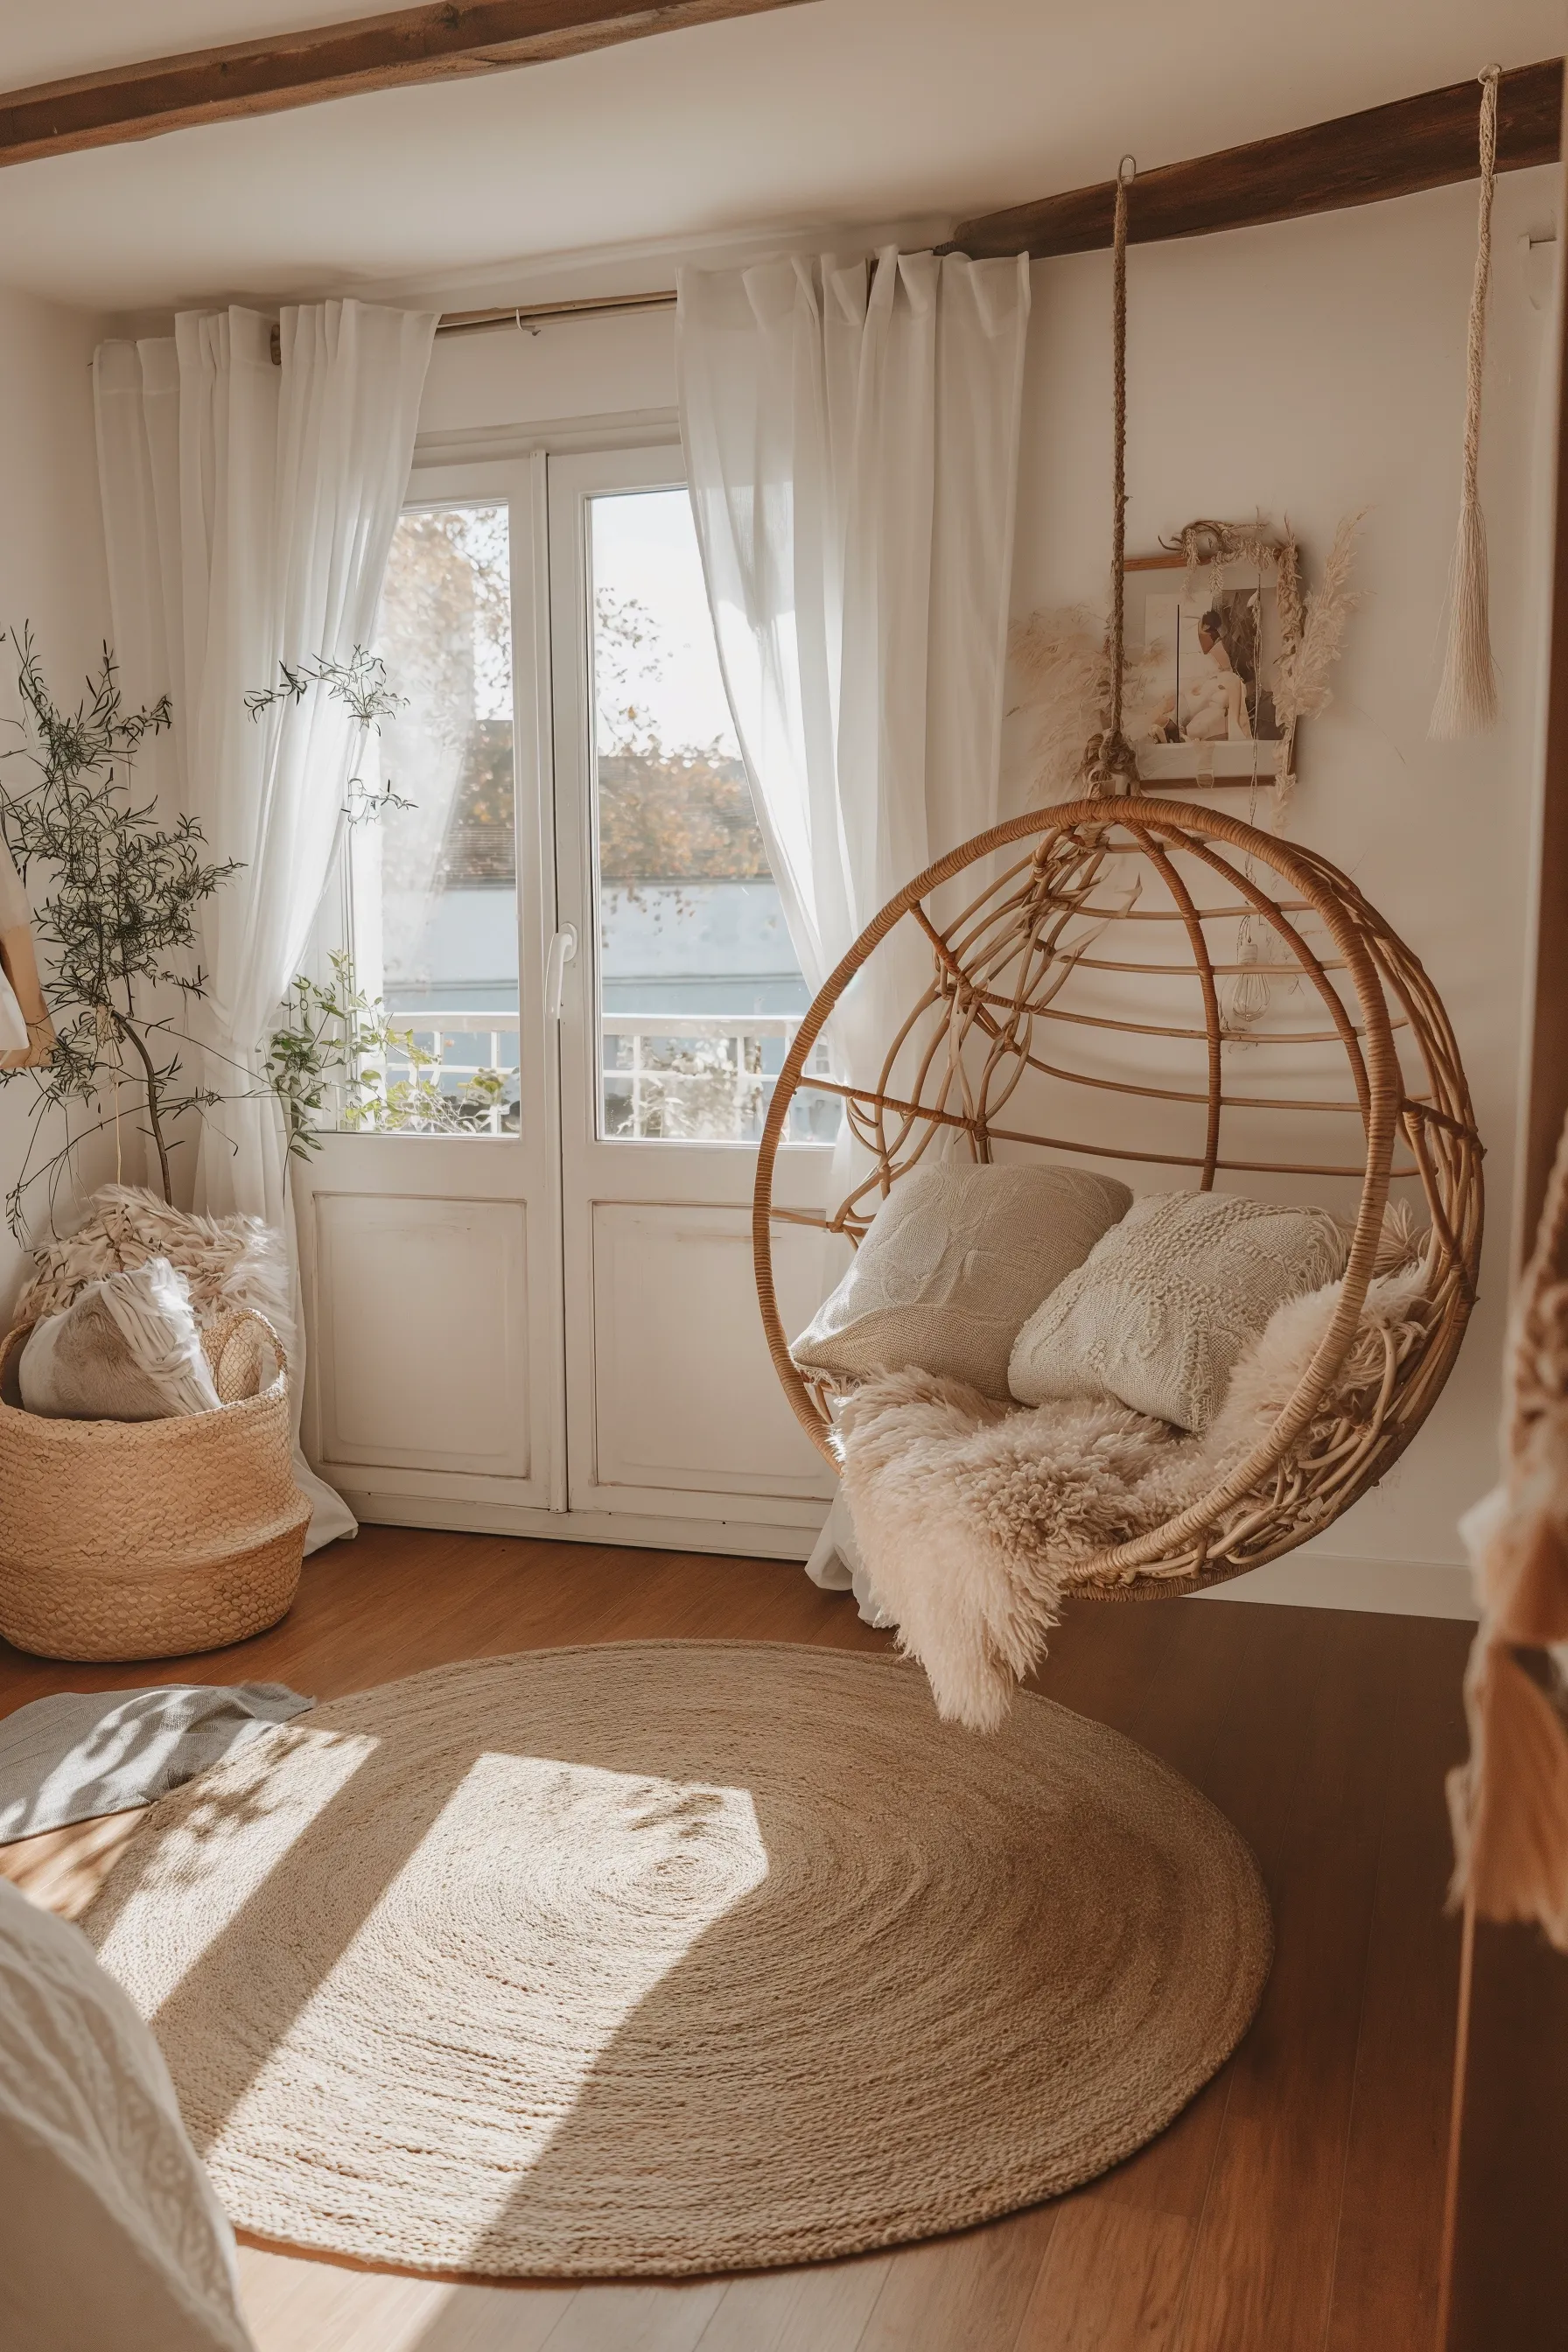 A cozy style boho bedroom with an egg chair